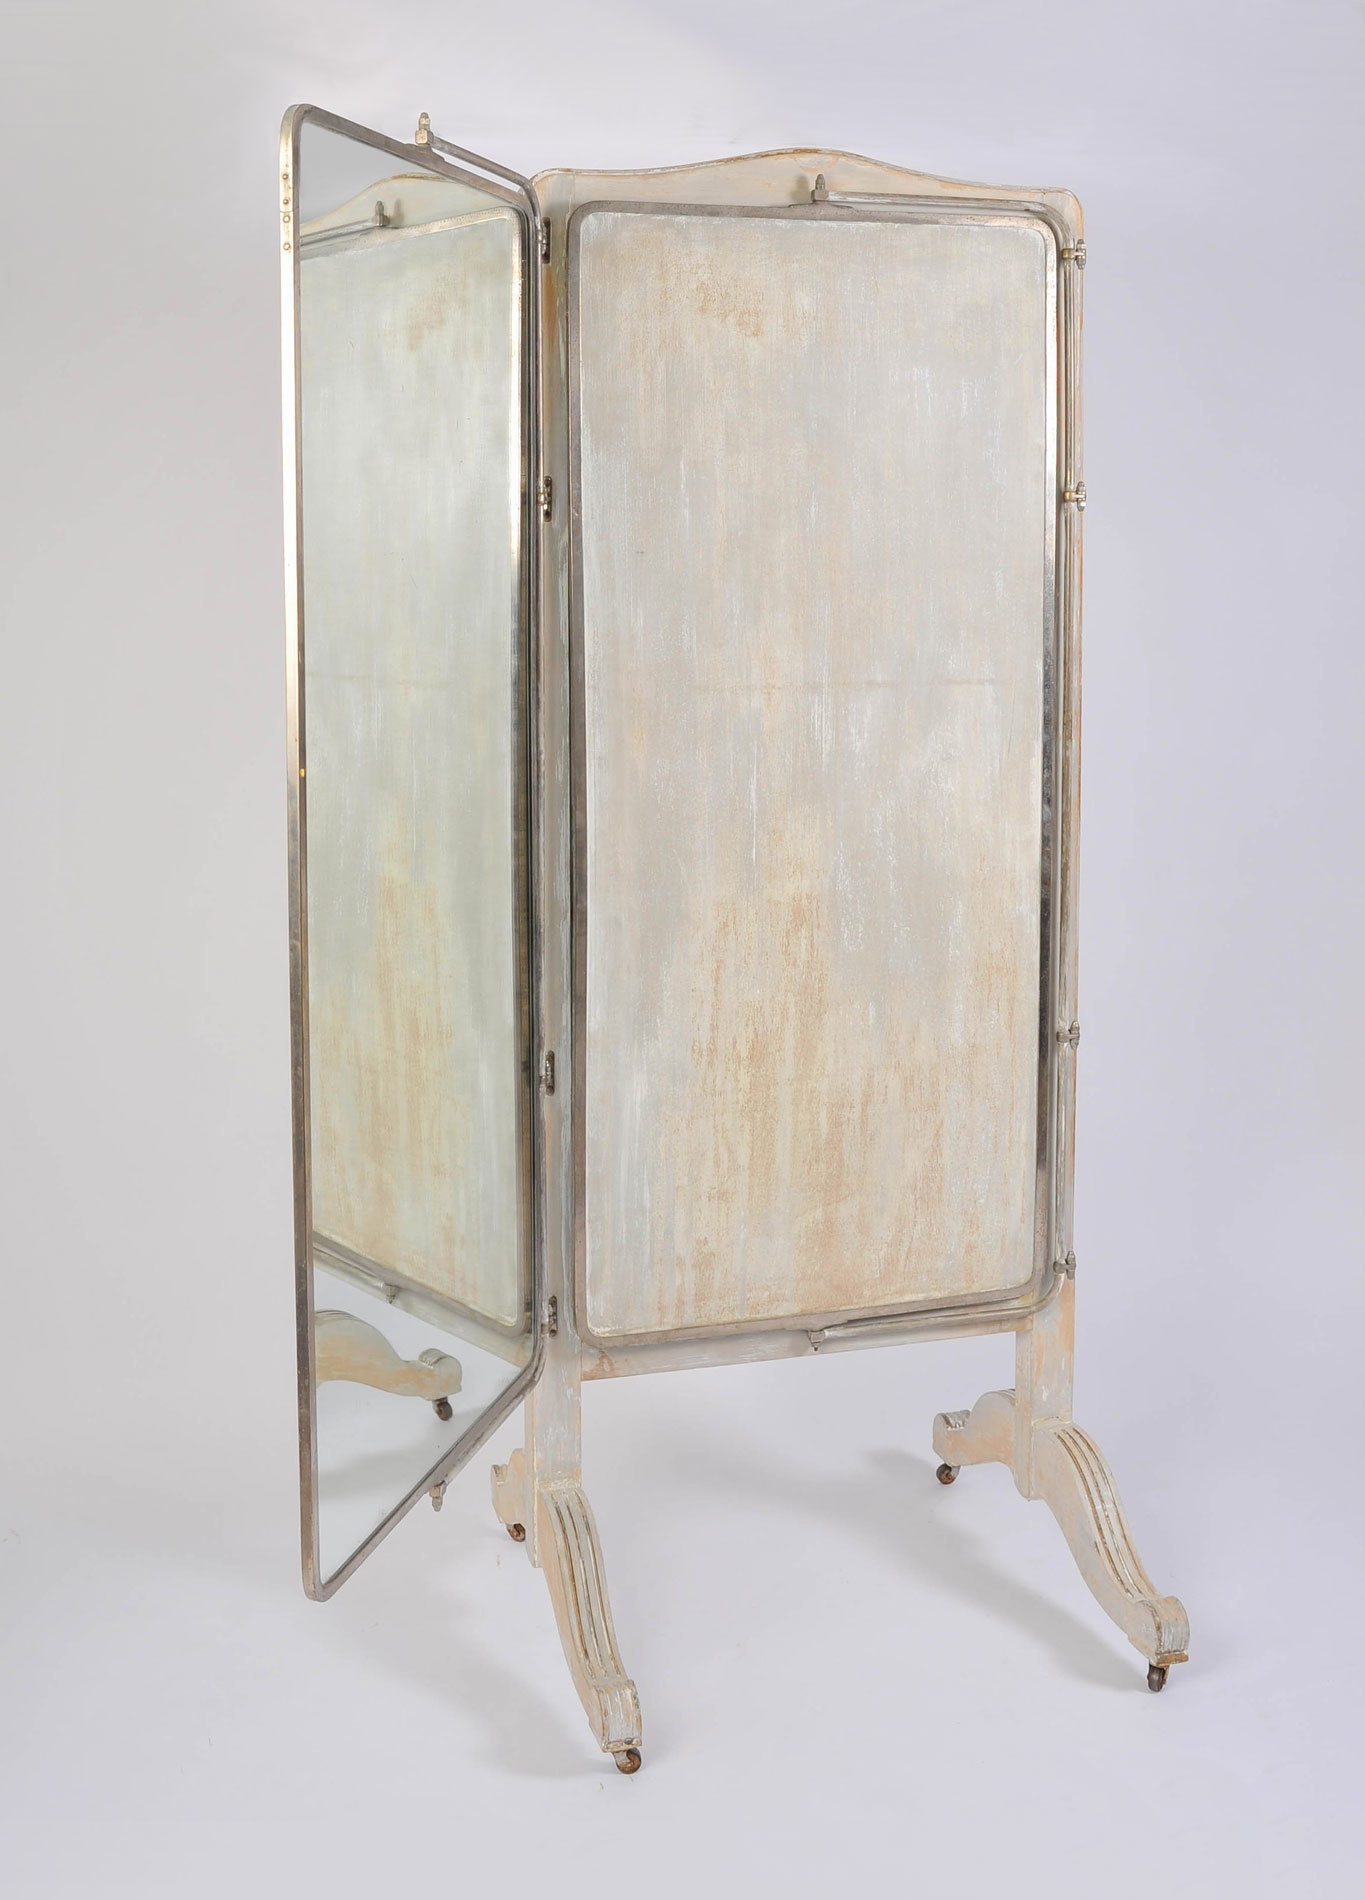 The image for Large Triptych Standing Mirror 02